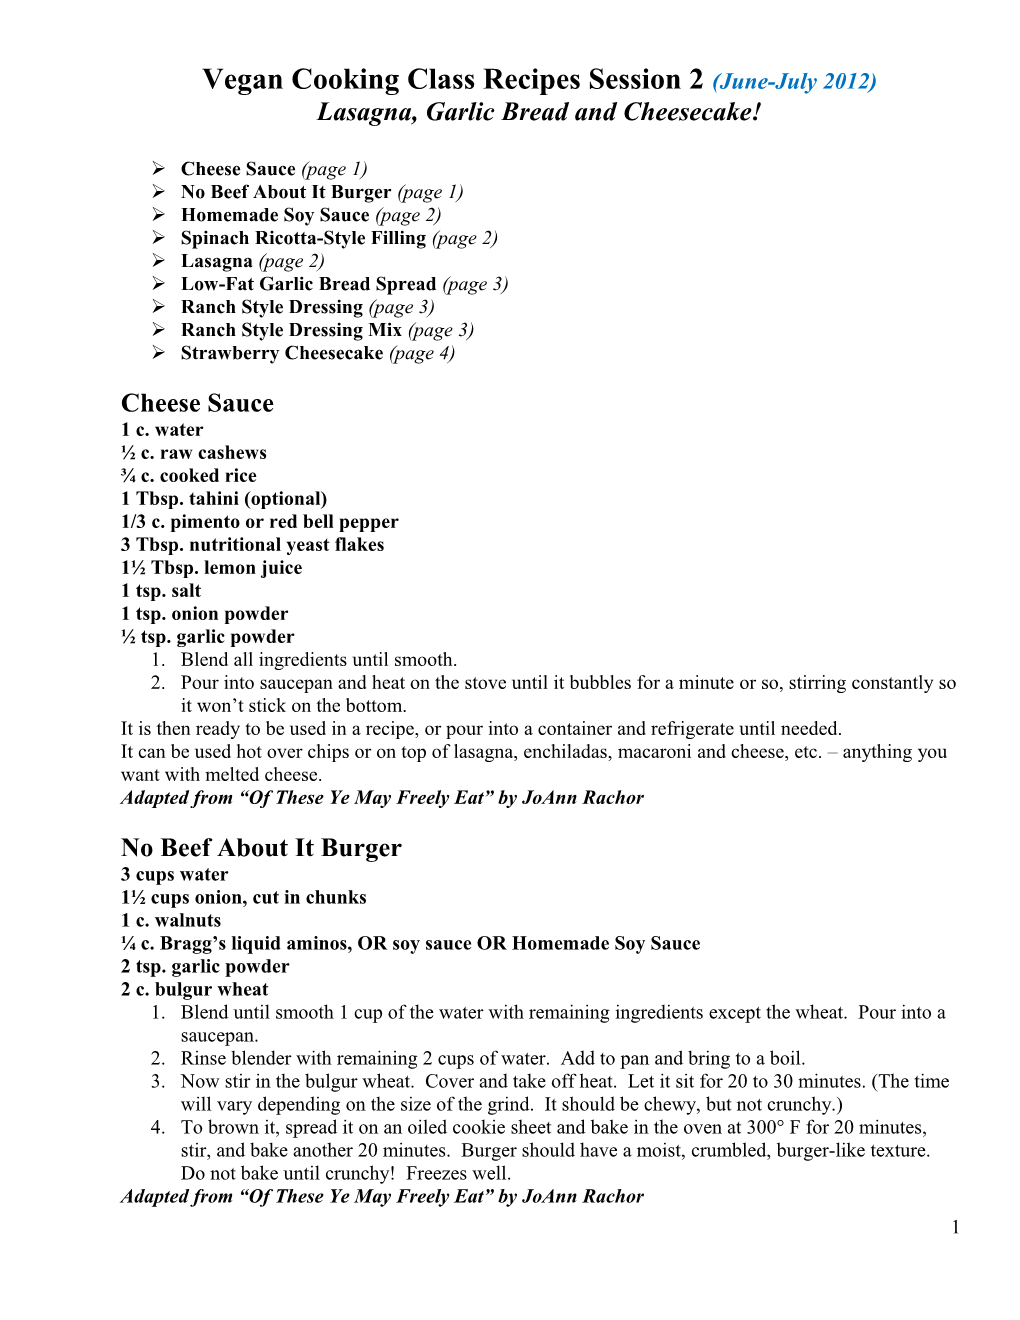 Cheese Sauce - Recipe Adapted from of These Ye May Freely Eat by Joann Rachor